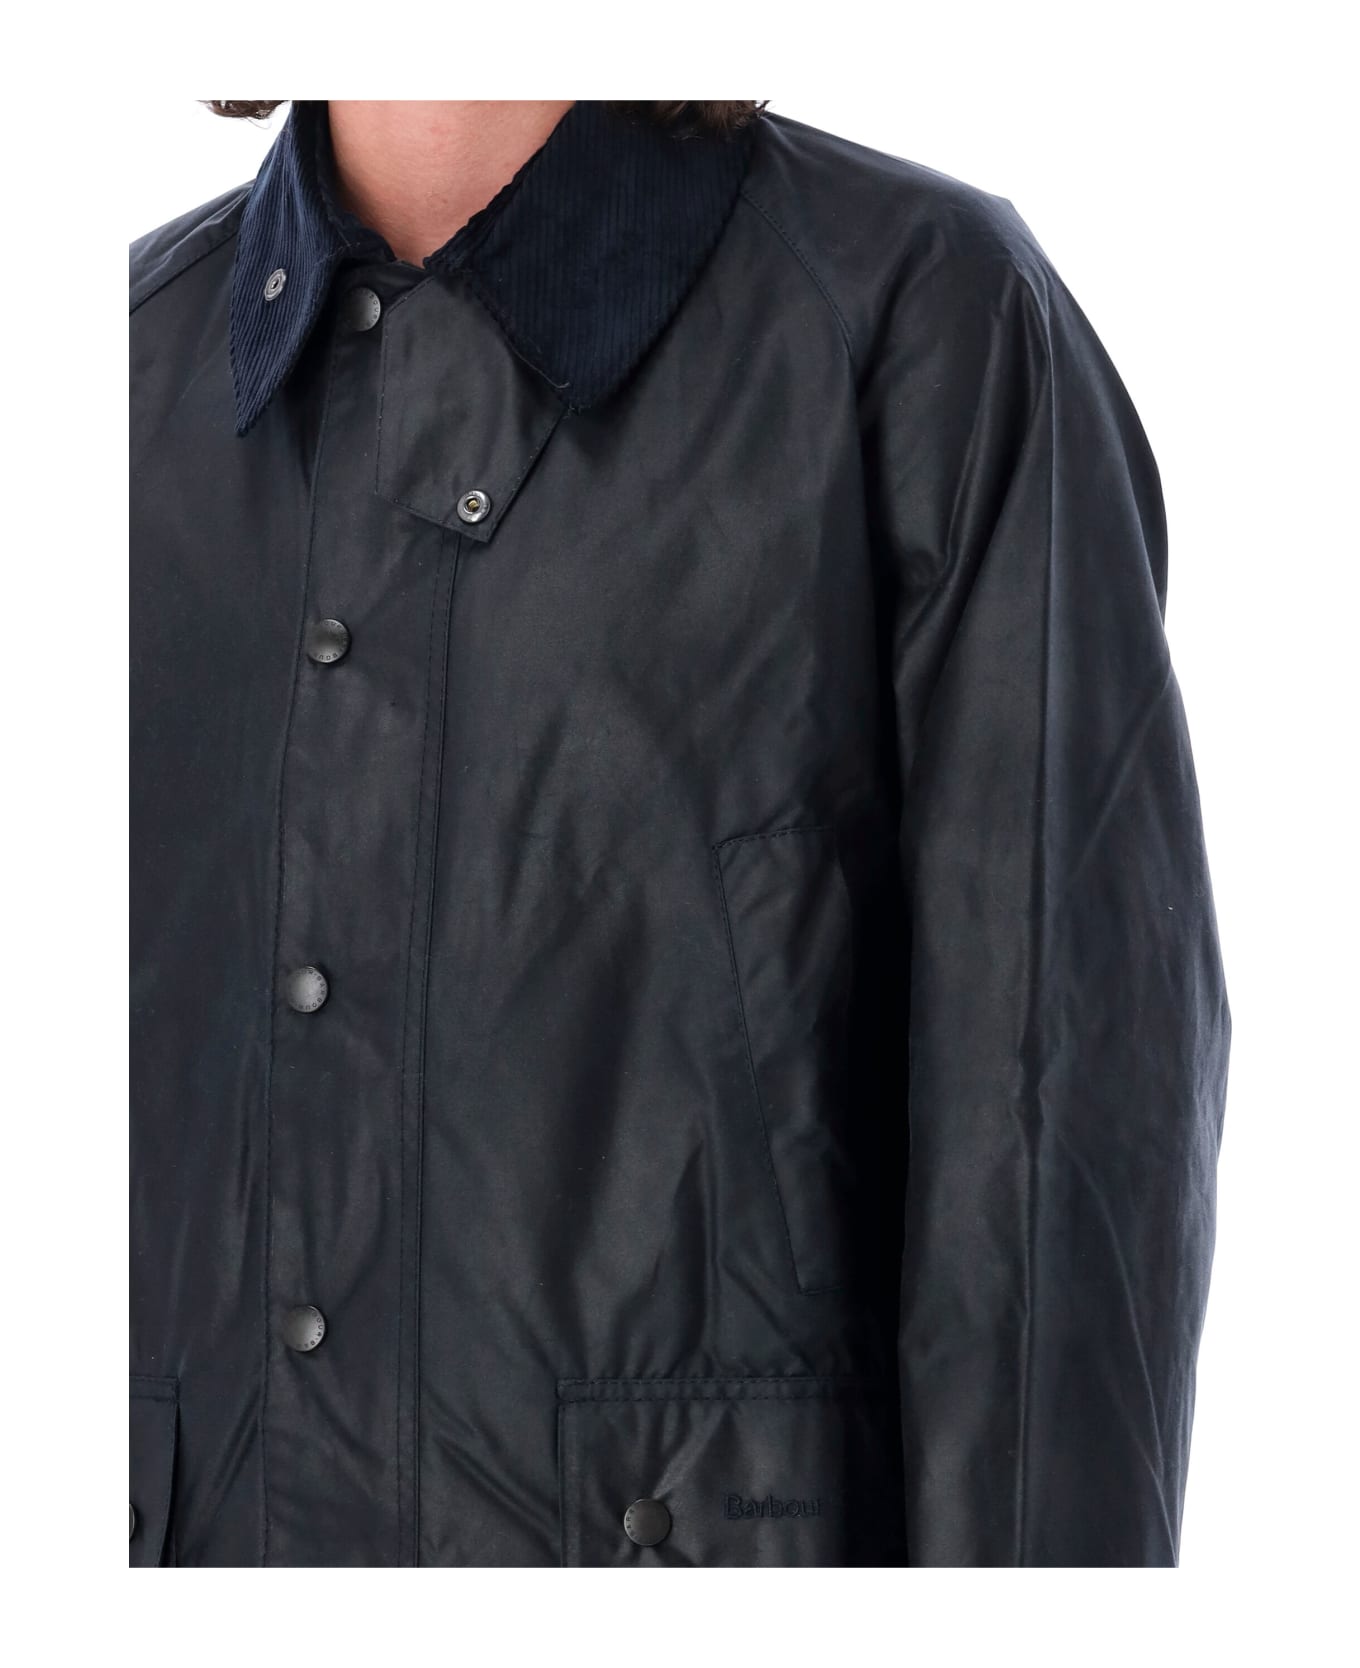 Barbour Bedale Wax Jacket - NAVY ブレザー